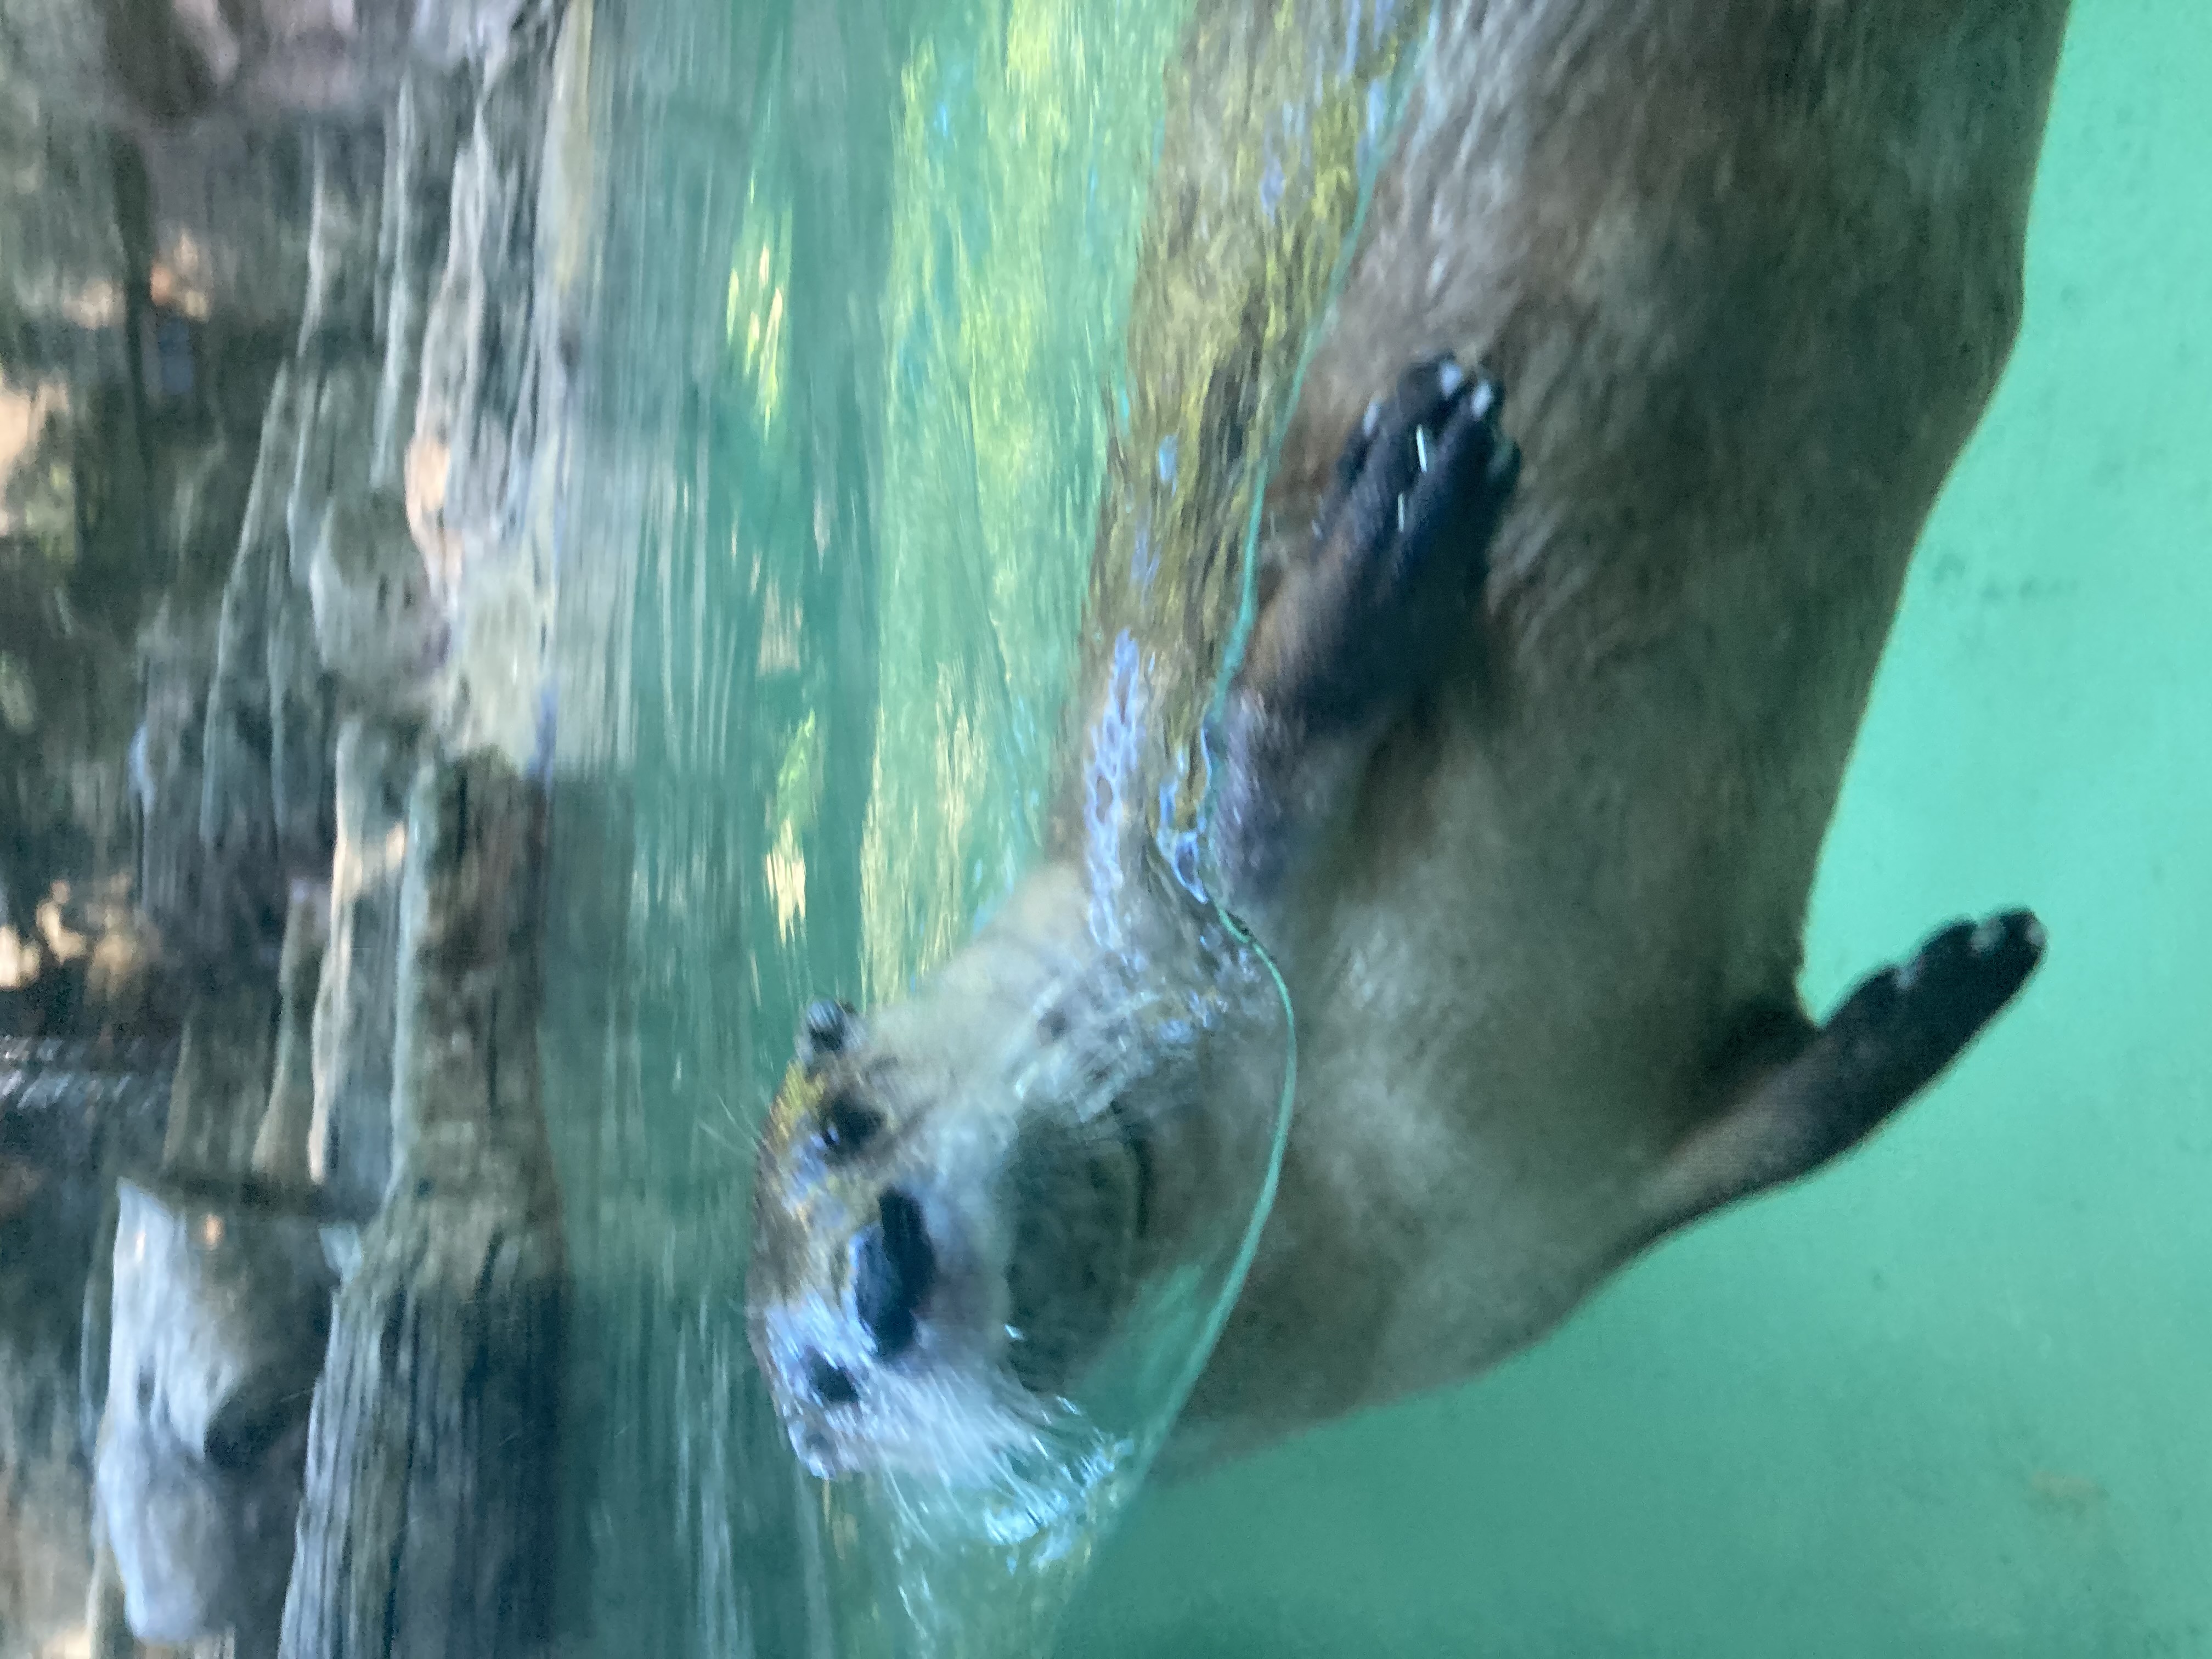 a slightly blurry photo of a light brown river otter as seen through a pane of glass. the otter has her body horizontal under the water and her stomach faces outward. her head is above the water and she is looking at the camera. blue water and various rocks make up the background.